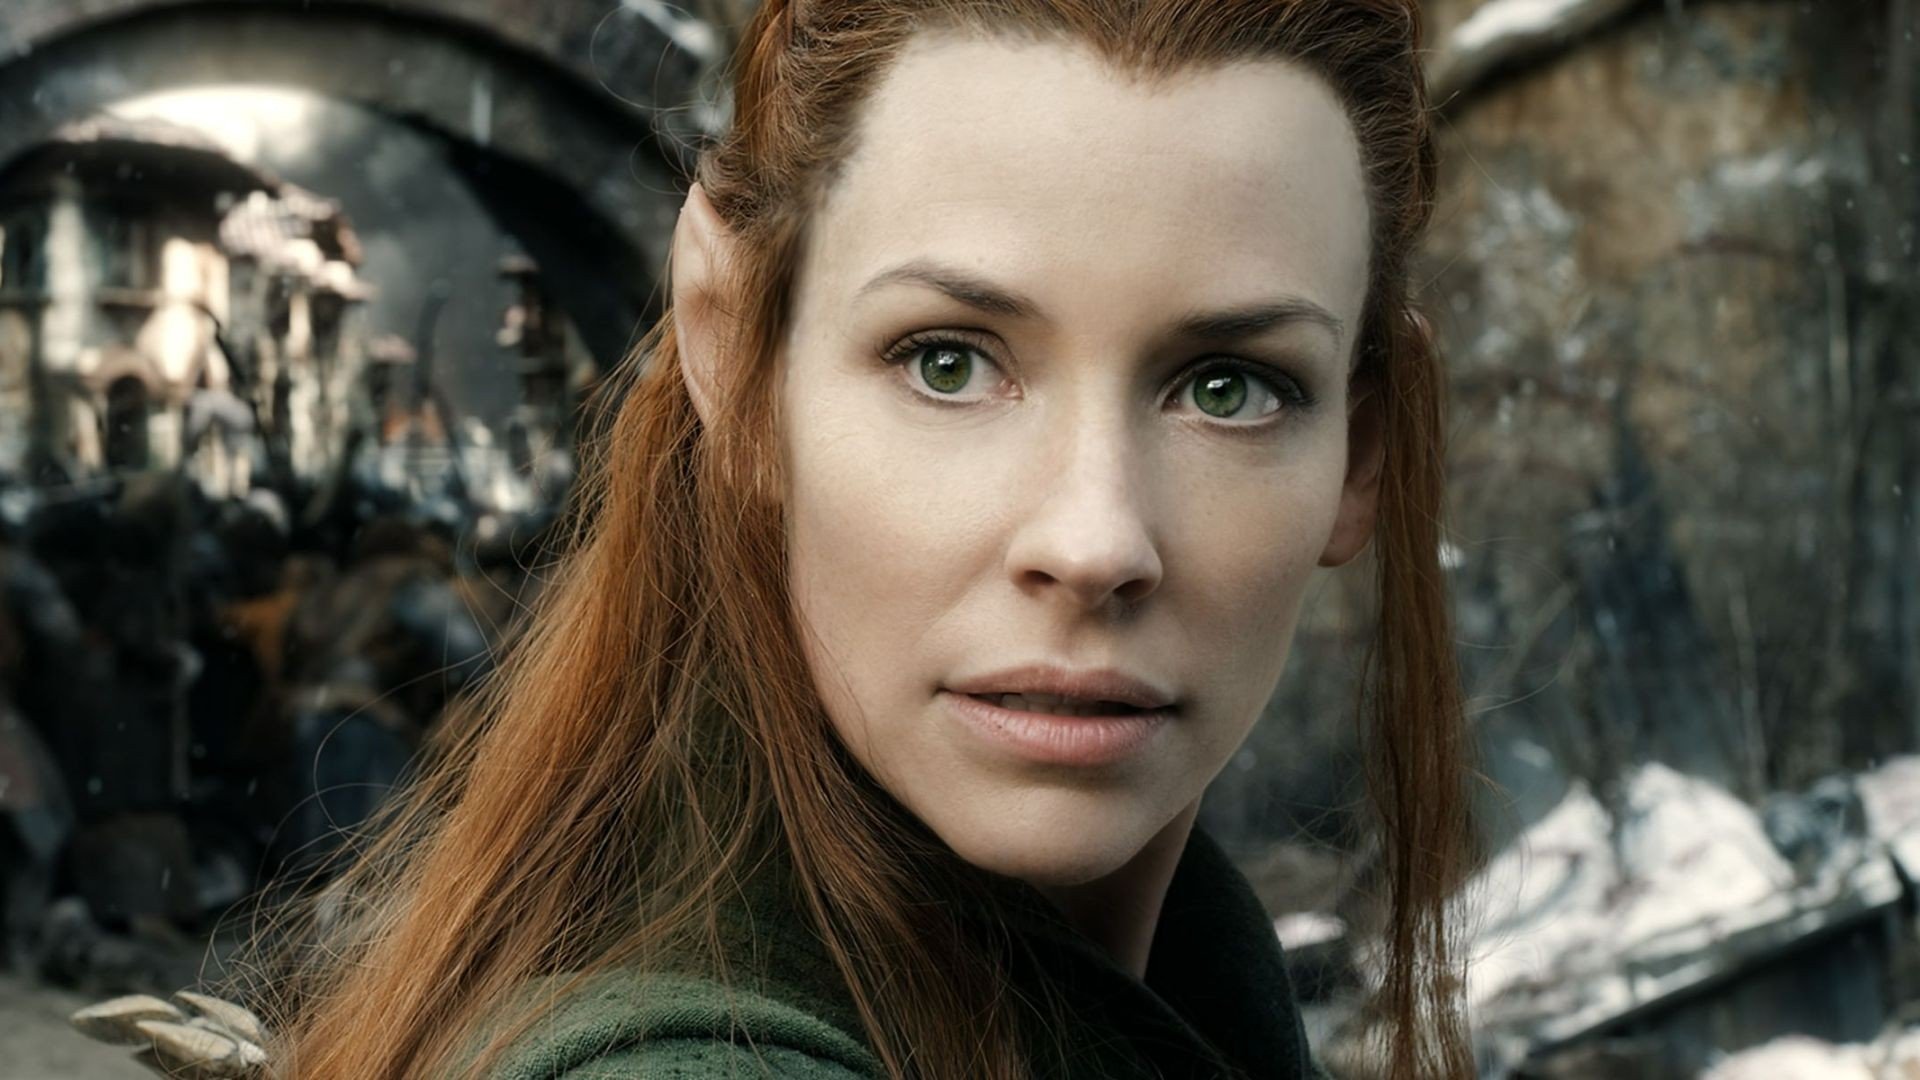 The Hobbit, Tauriel, Face, Redhead, Movies, Women, Evangeline Lilly, Green eyes, The Hobbit: The Battle of the Five Armies Wallpaper